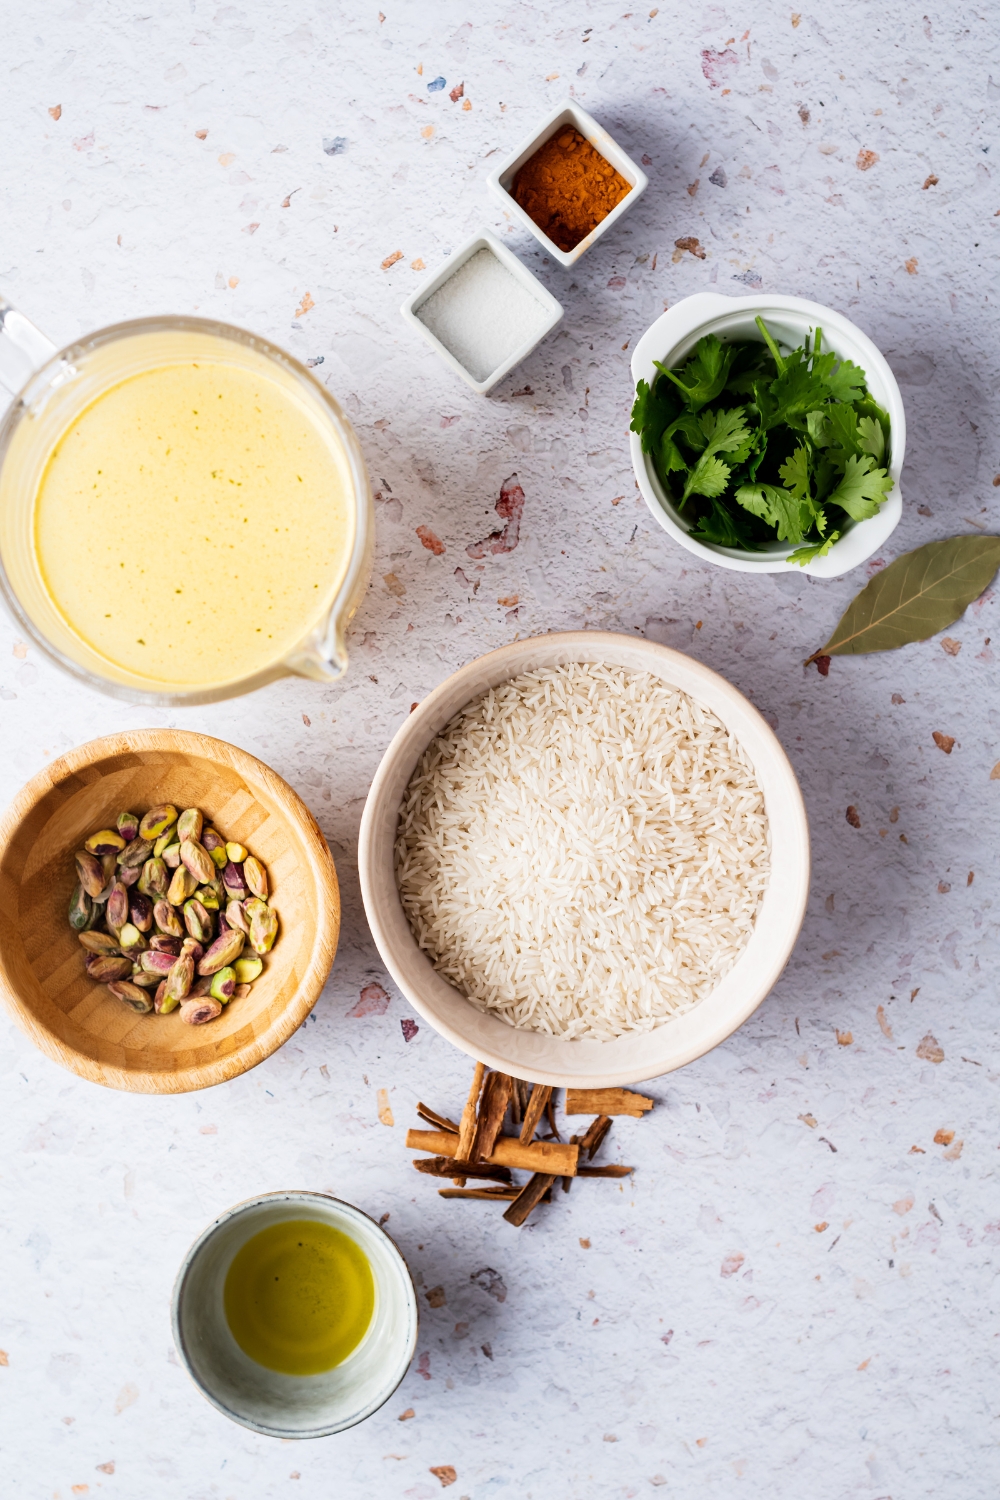 A bowl of rice, a bowl of pistachios, a bowl of broth, a bowl of oil, a bowl of basil, and a bowl of cinnamon on a white counter.